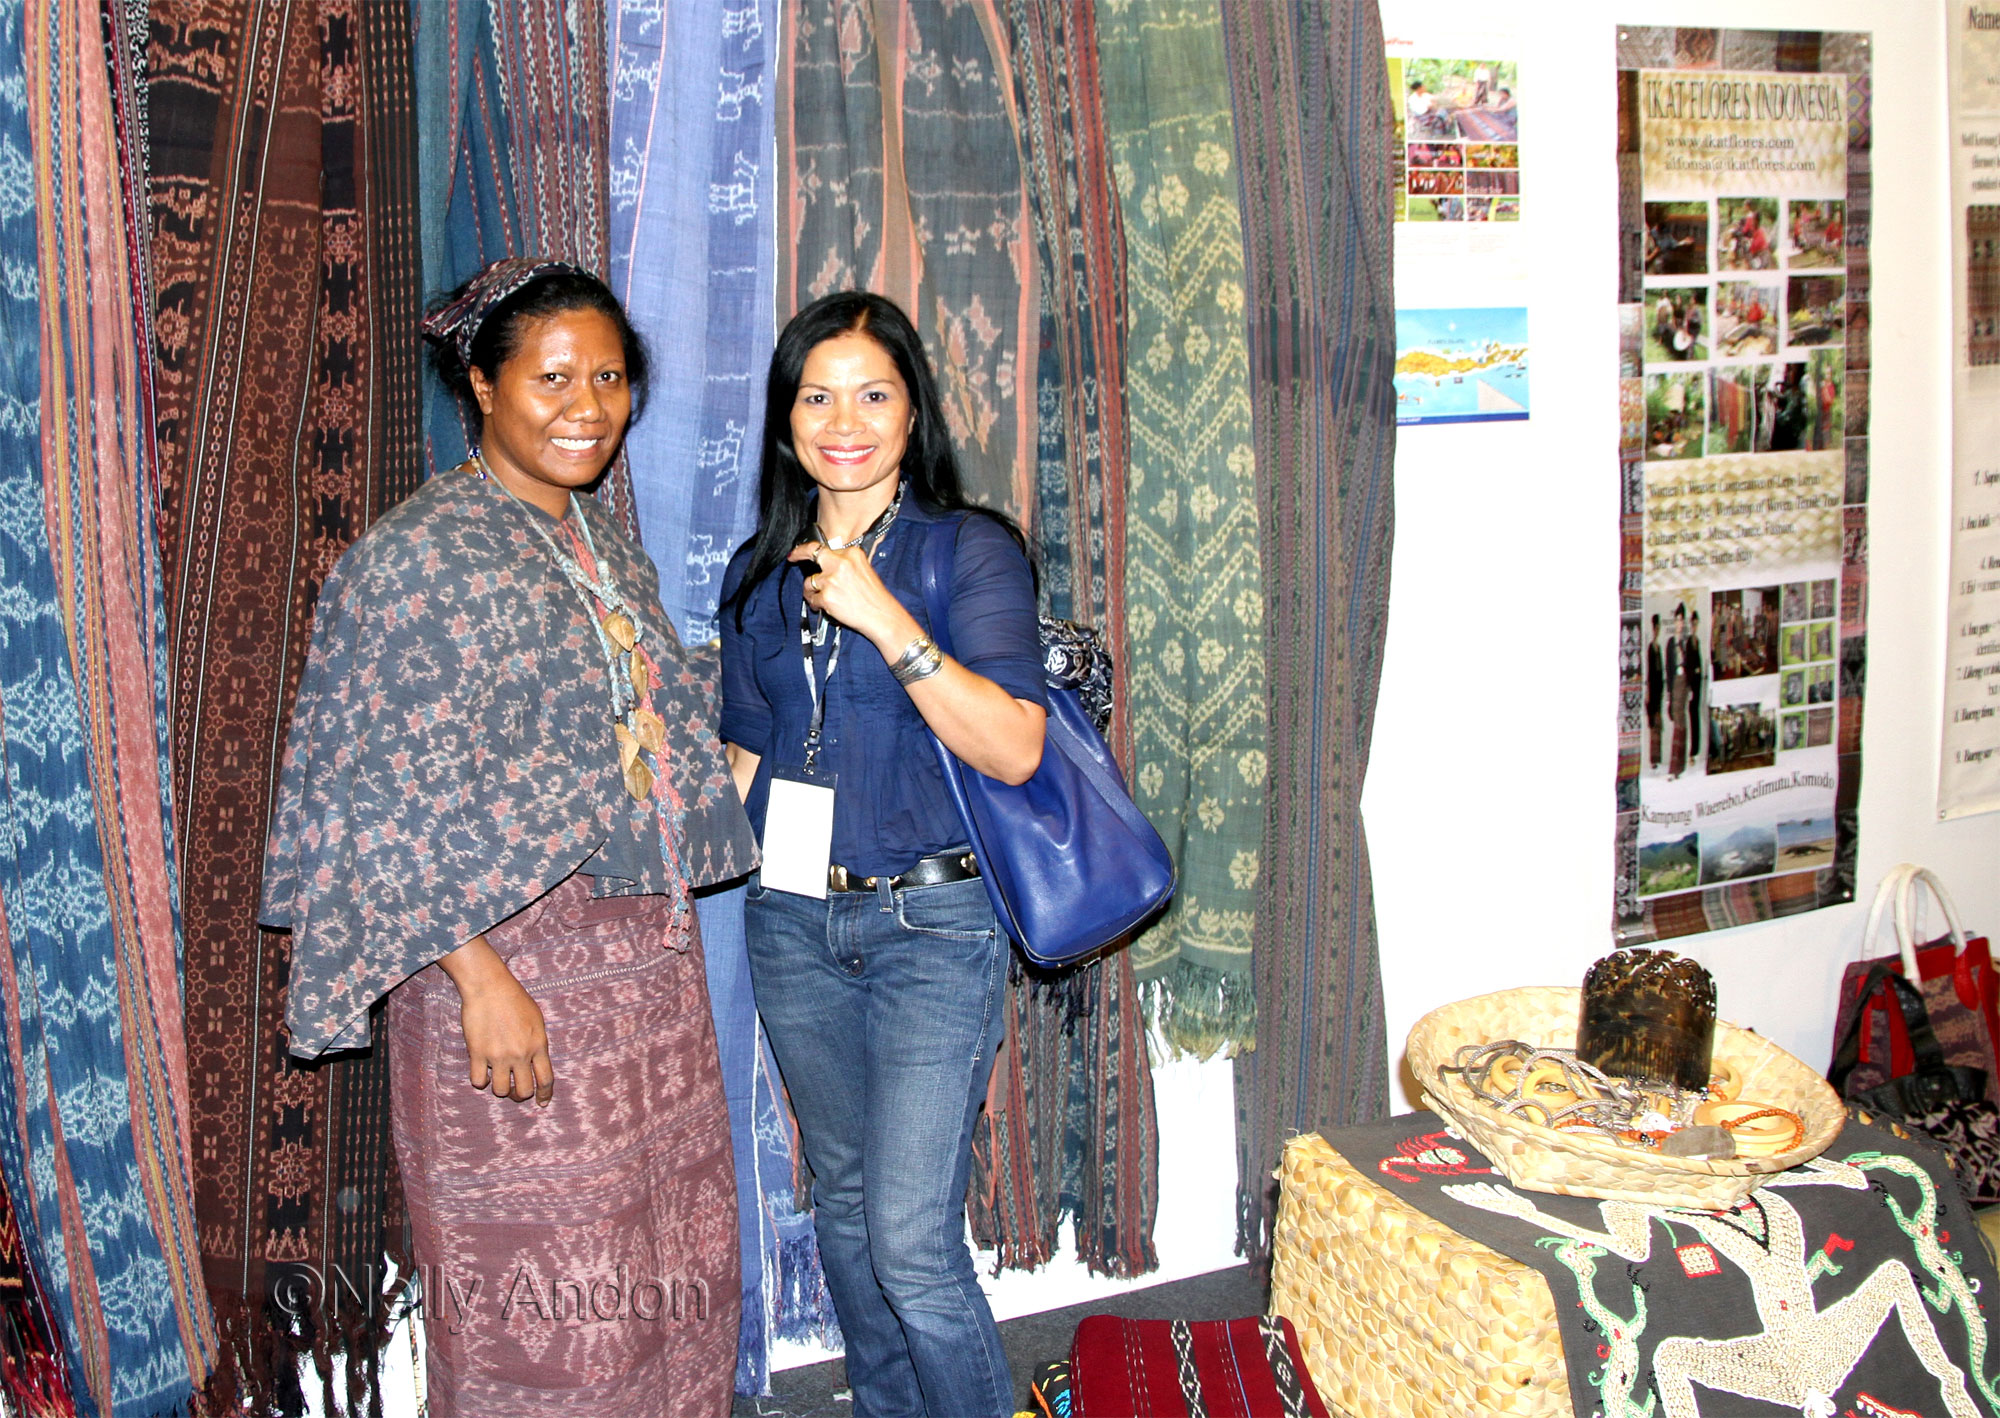 Meeting Alfonsa Horeng, a devoted weaver from Flores